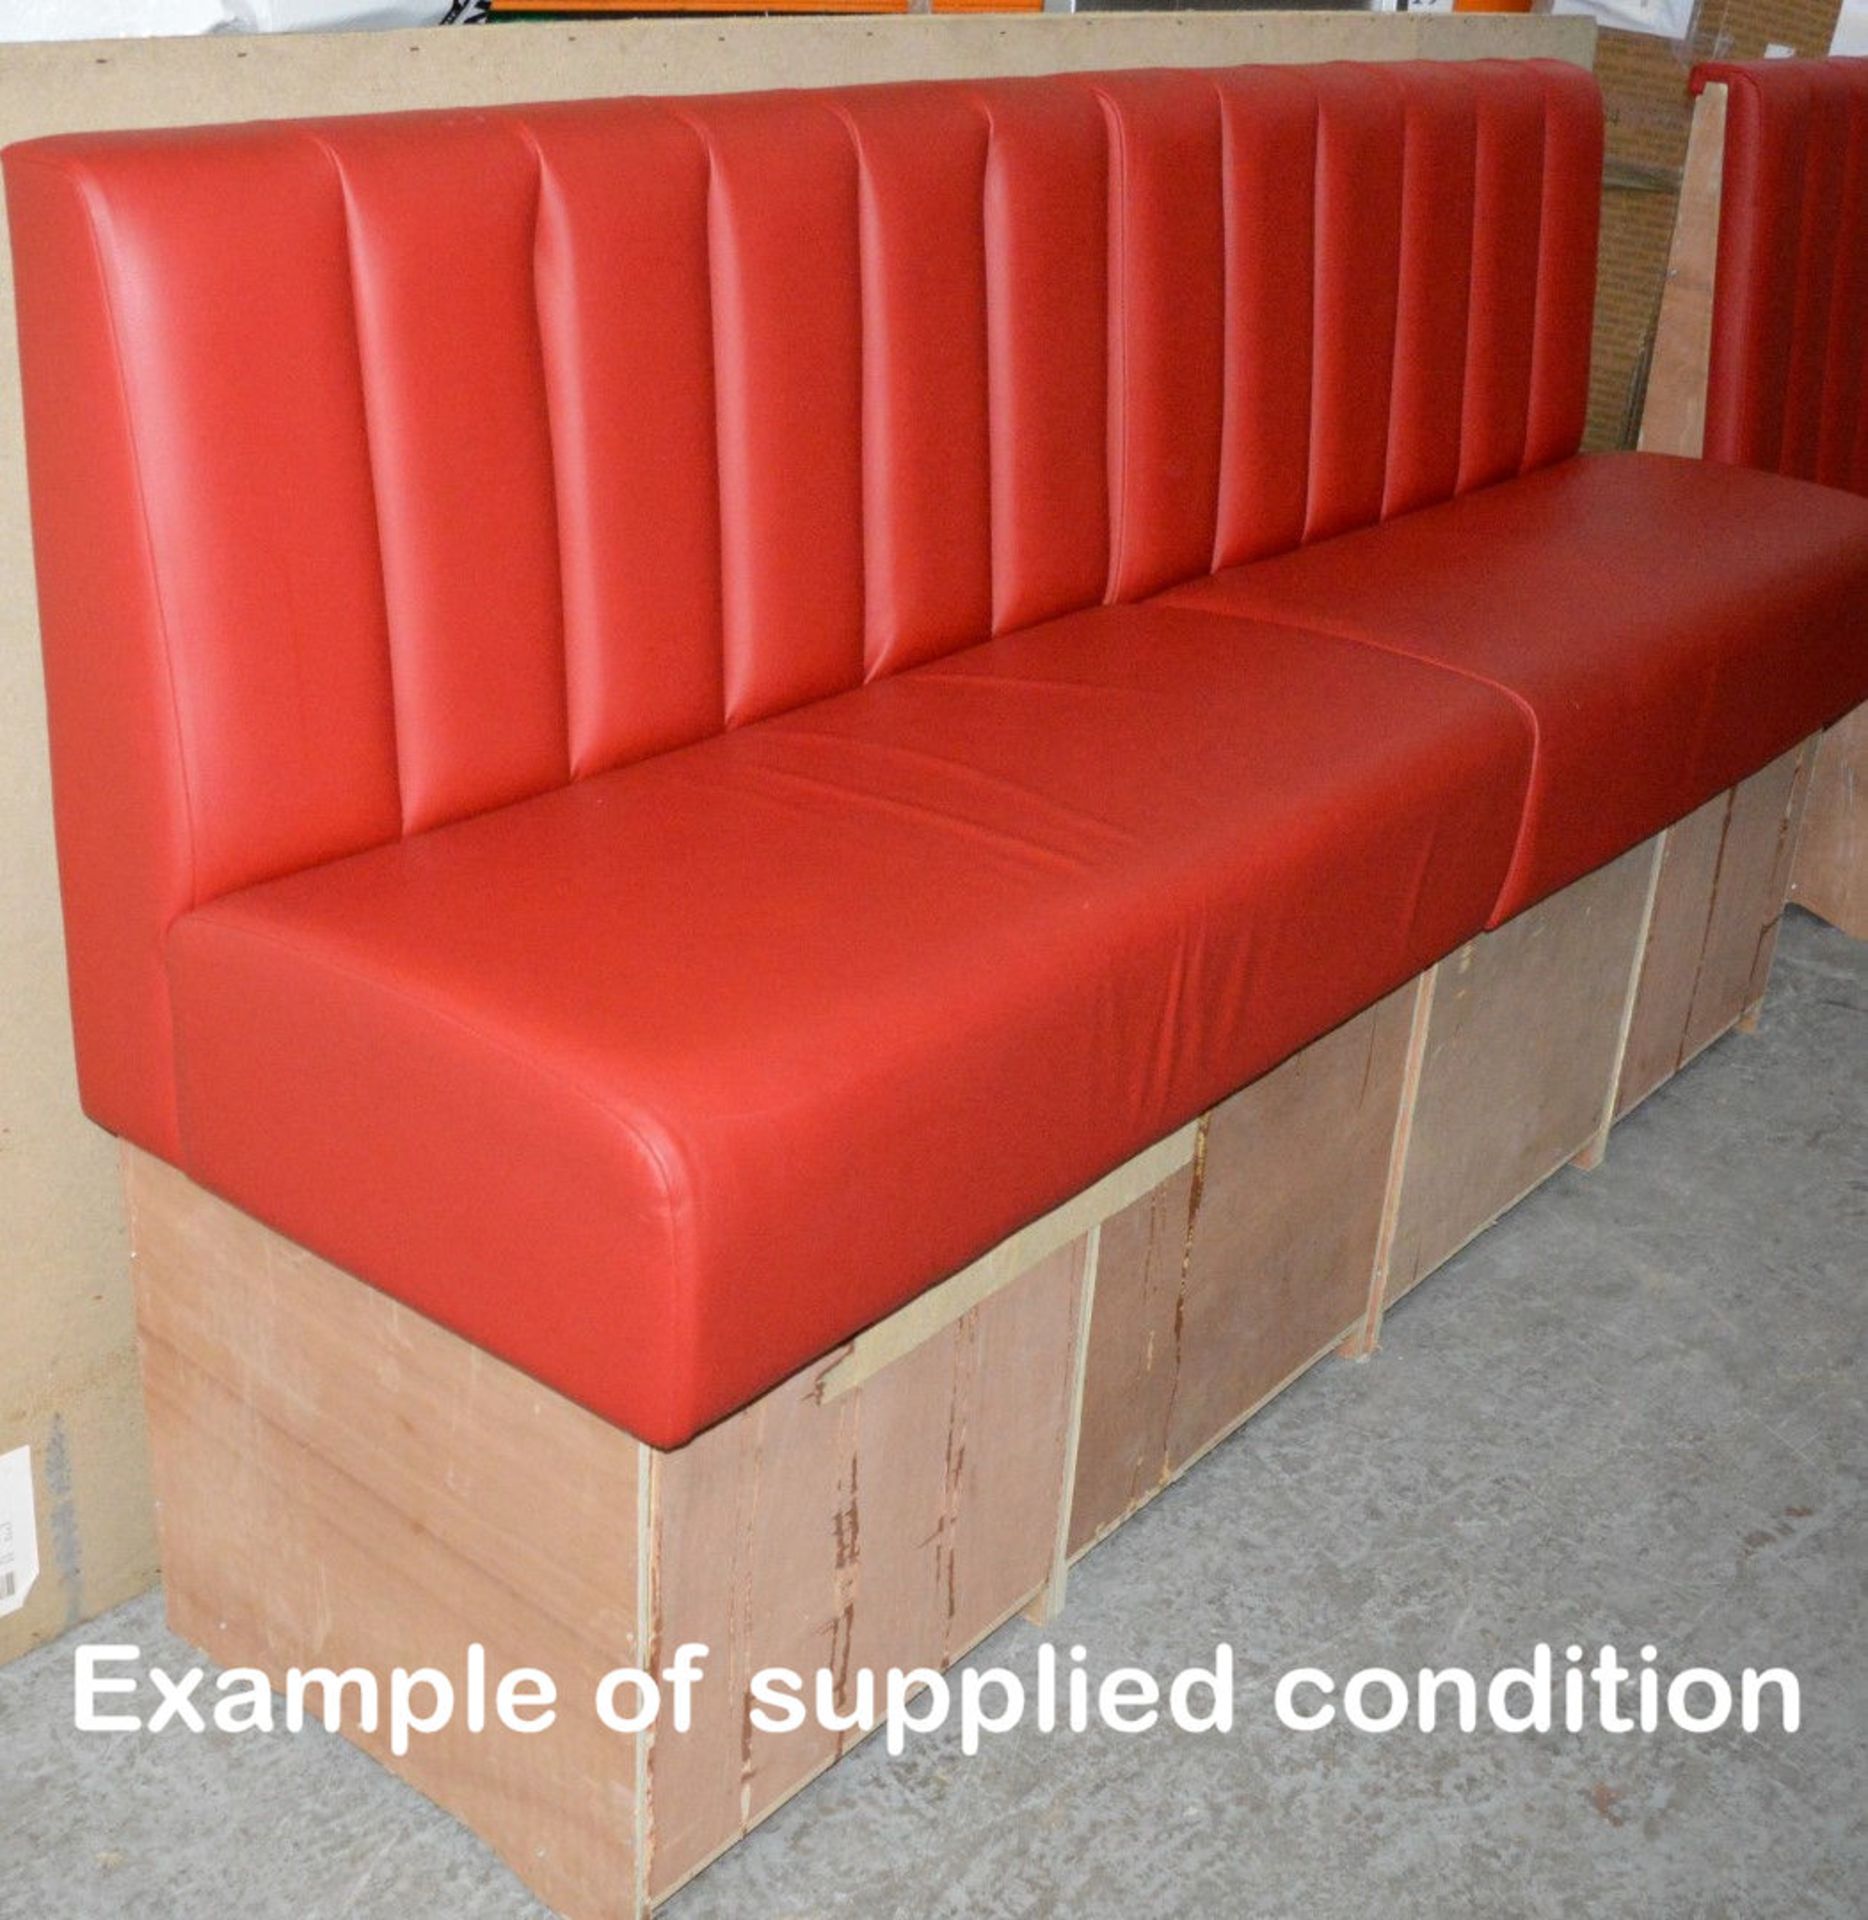 2 x Seating Booth Sections Upholstered In A Bright Red Leather - Also Includes 1 x Privacy Panel - Image 3 of 9